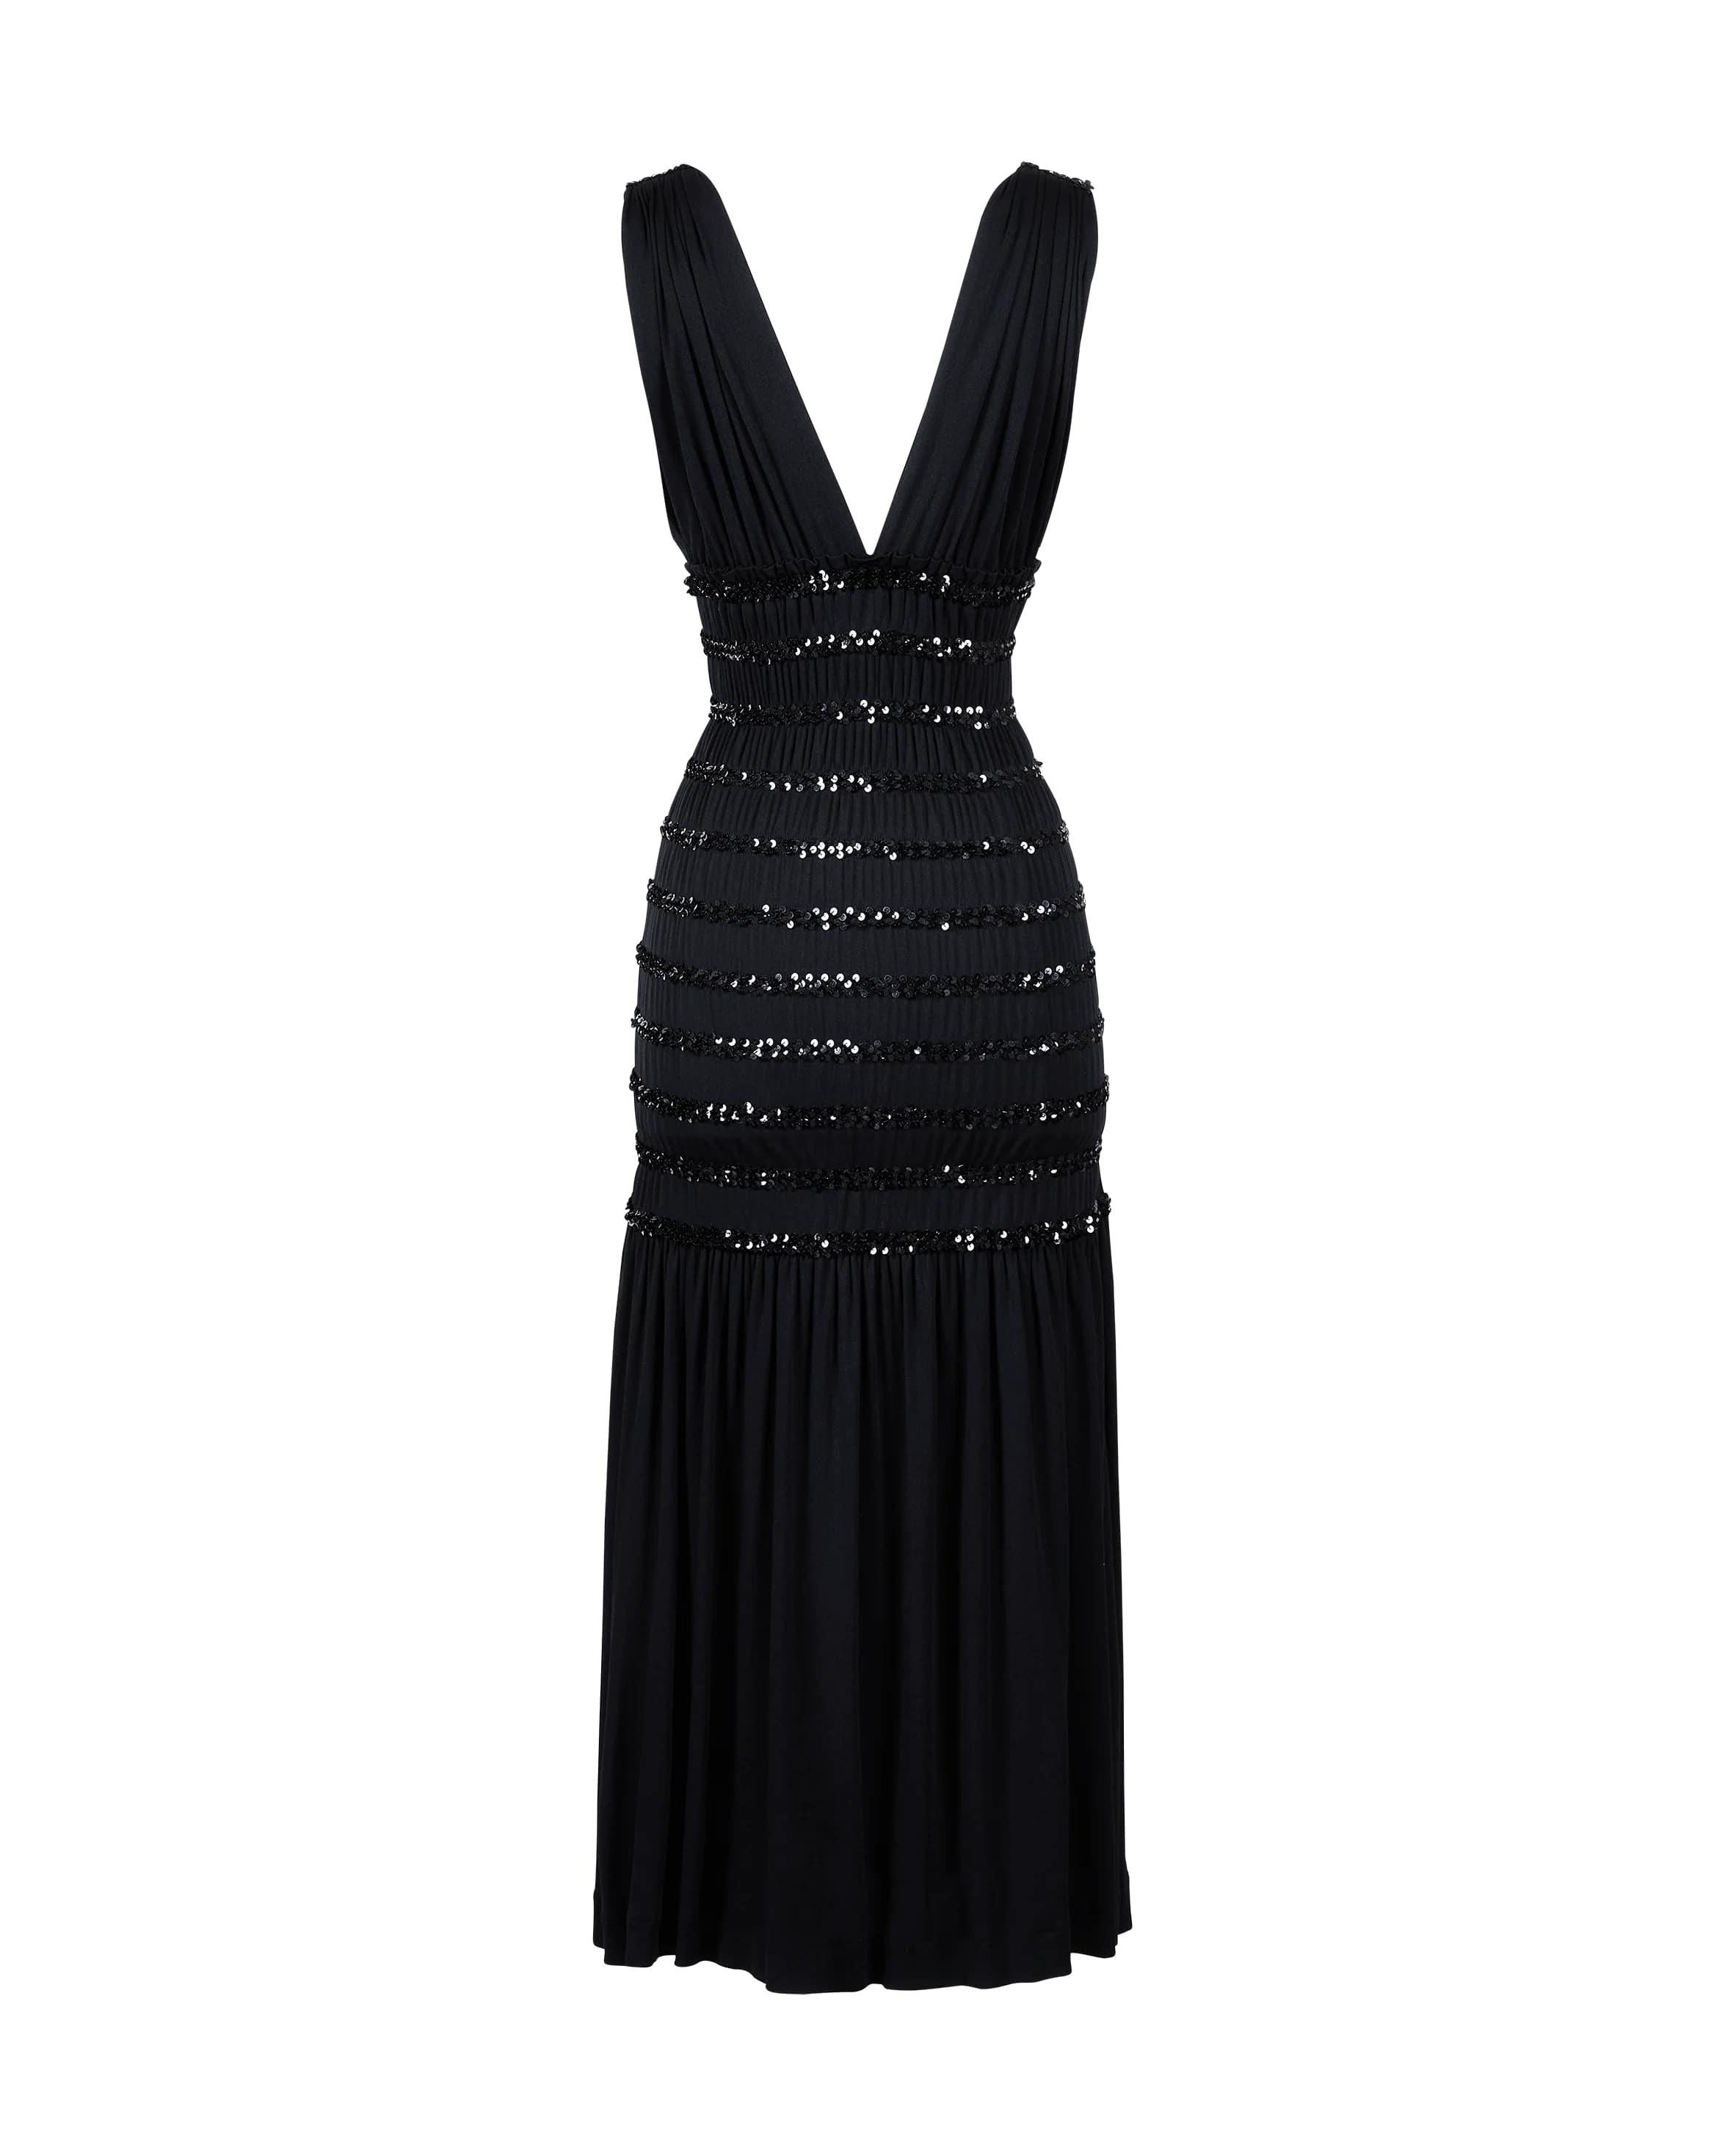 1983 Yves Saint Laurent Rive Gauche Black Jersey Sequin Dress In Good Condition In North Hollywood, CA